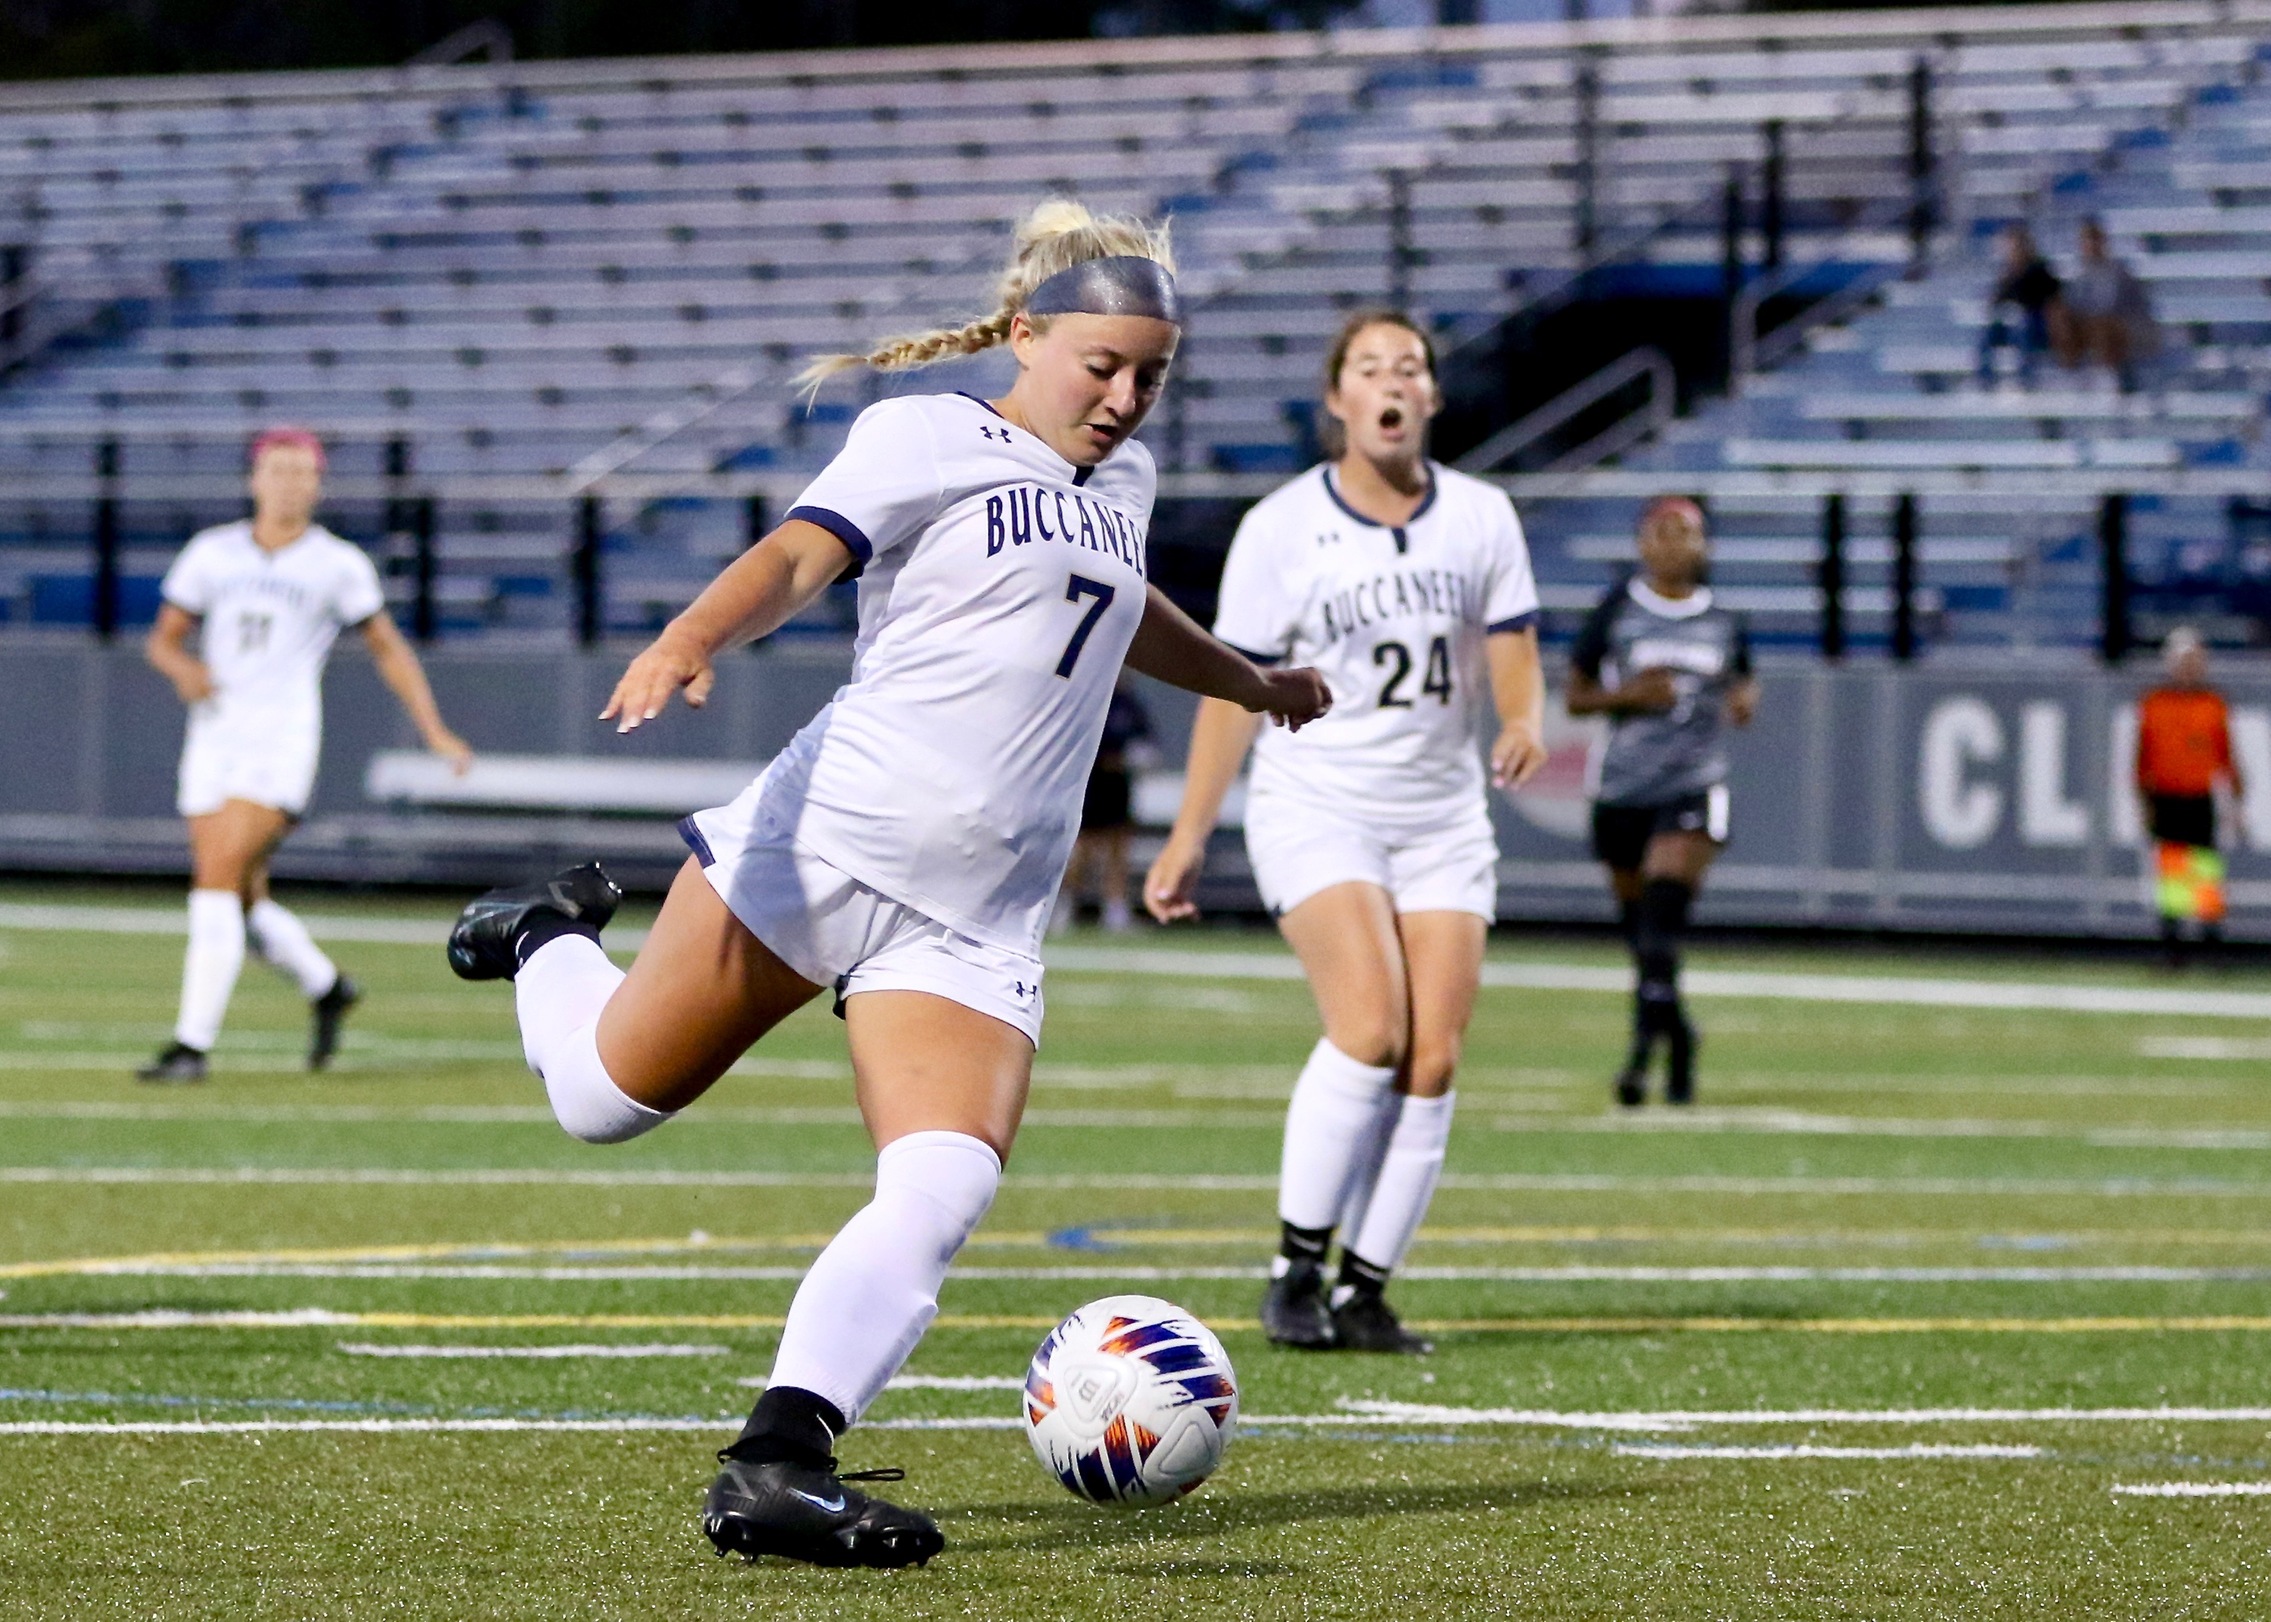 Women's Soccer: Bucs and MCLA Draw in MASCAC Matchup